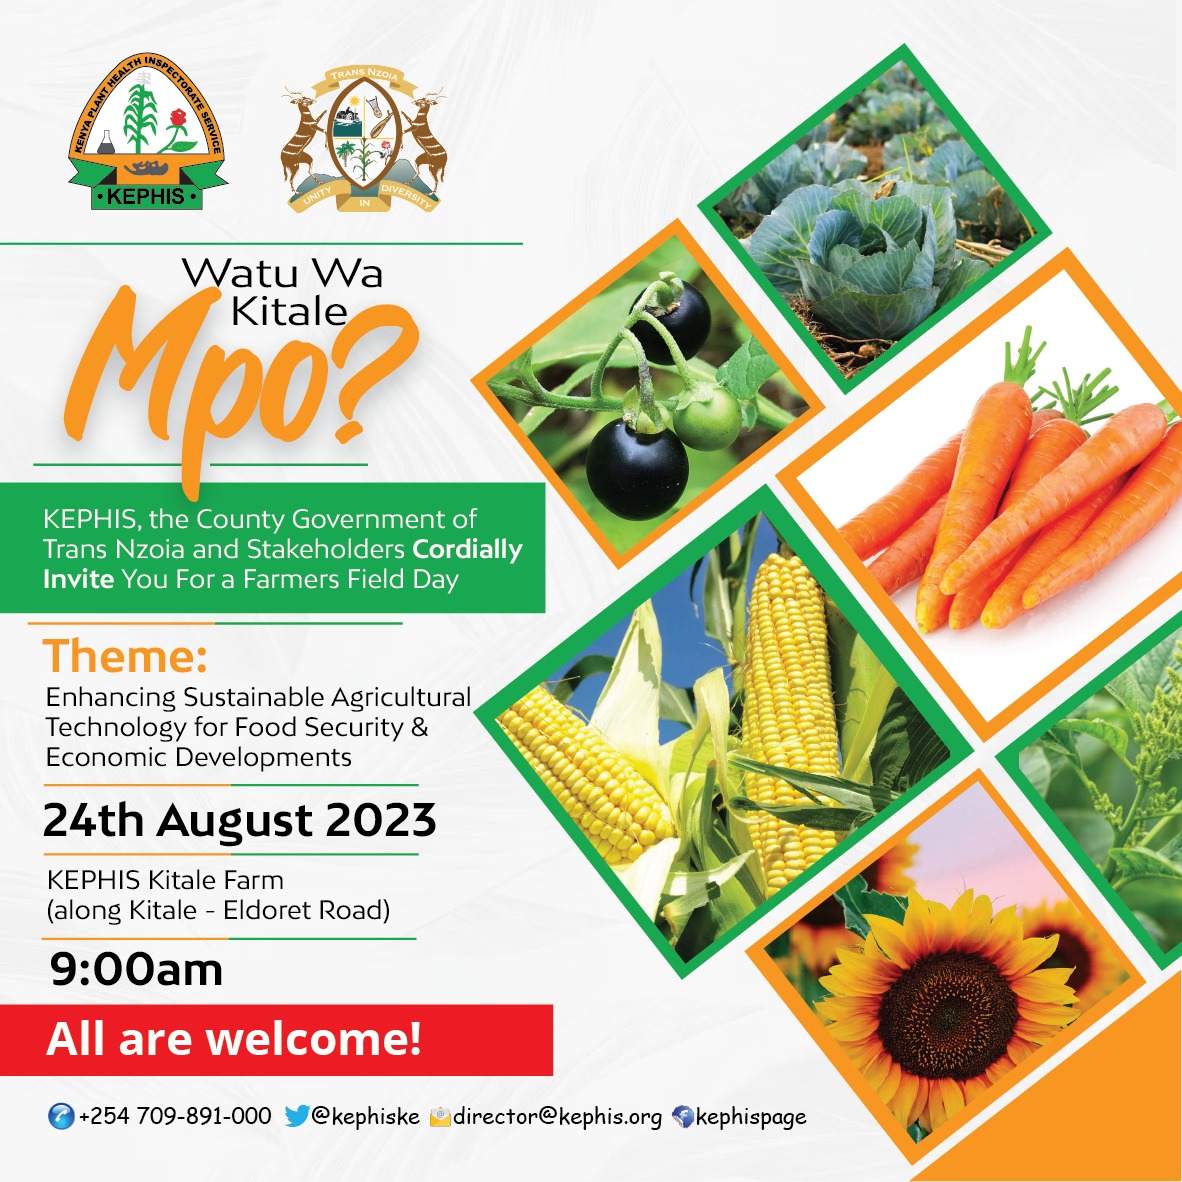 If you are in Kitale or its environs.. or even further, make some time to attend the Kitale farmers field day at our Kitale regional office farm..lots of crops to see and to learn how to grow them using Good Agricultural Practices. Tell a friend to tell a friend. See you there!